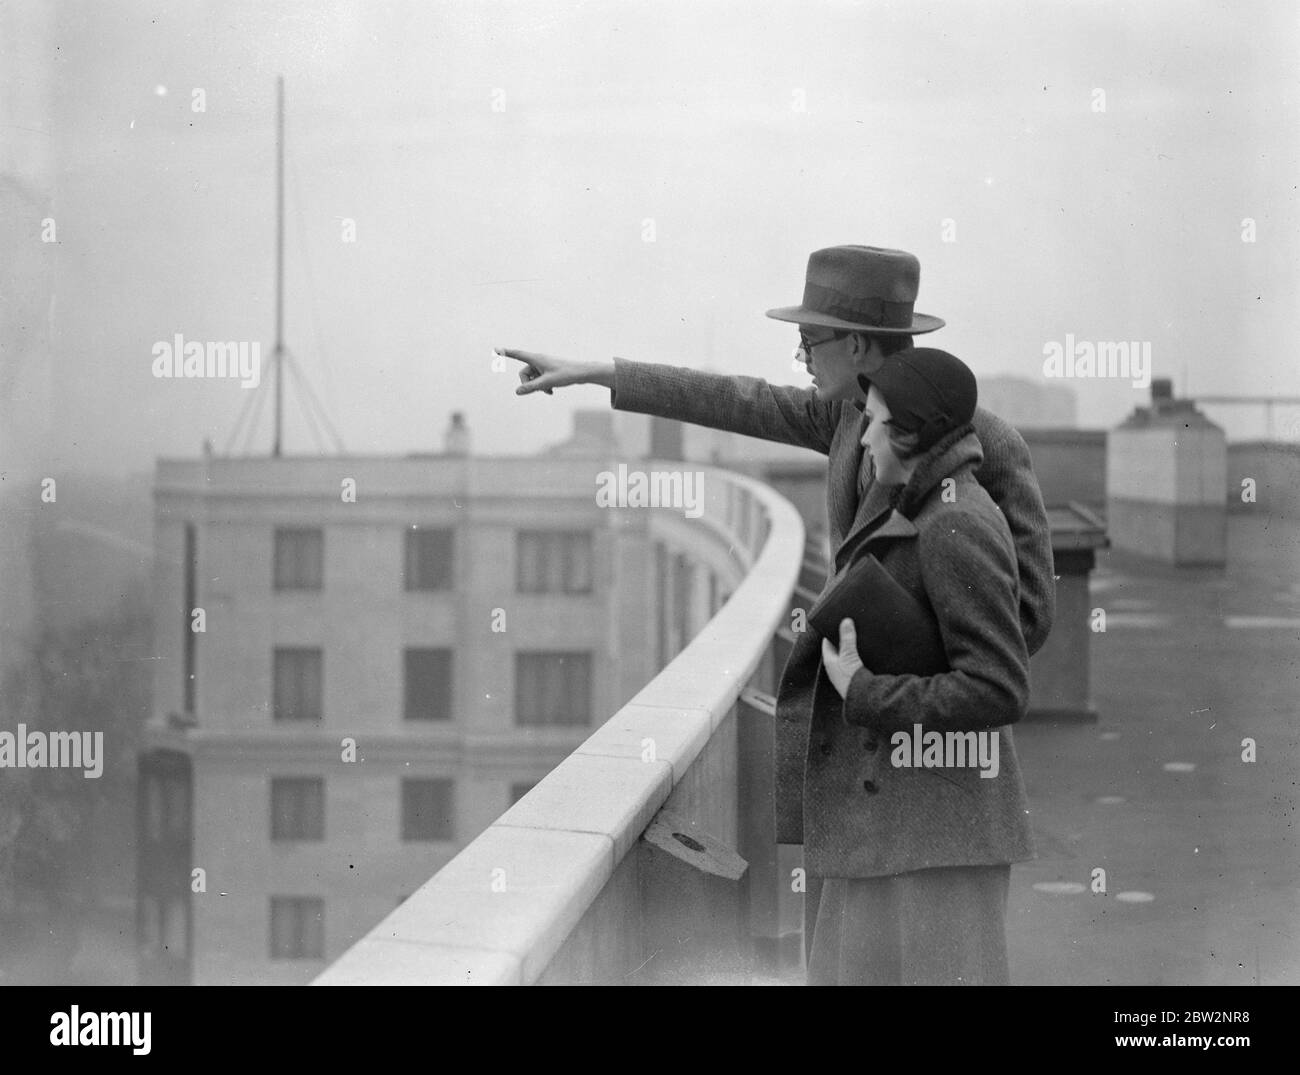 Prince Lennart and his bride in London . Prince Lennart of Sweden pointing out to his bride Miss Karen Nissvandt , various views of London from the roof of the hotel where they are staying pending their marriage at London register office . 24 February 1932 30s, 30's, 1930s, 1930's, thirties, nineteen thirties Stock Photo